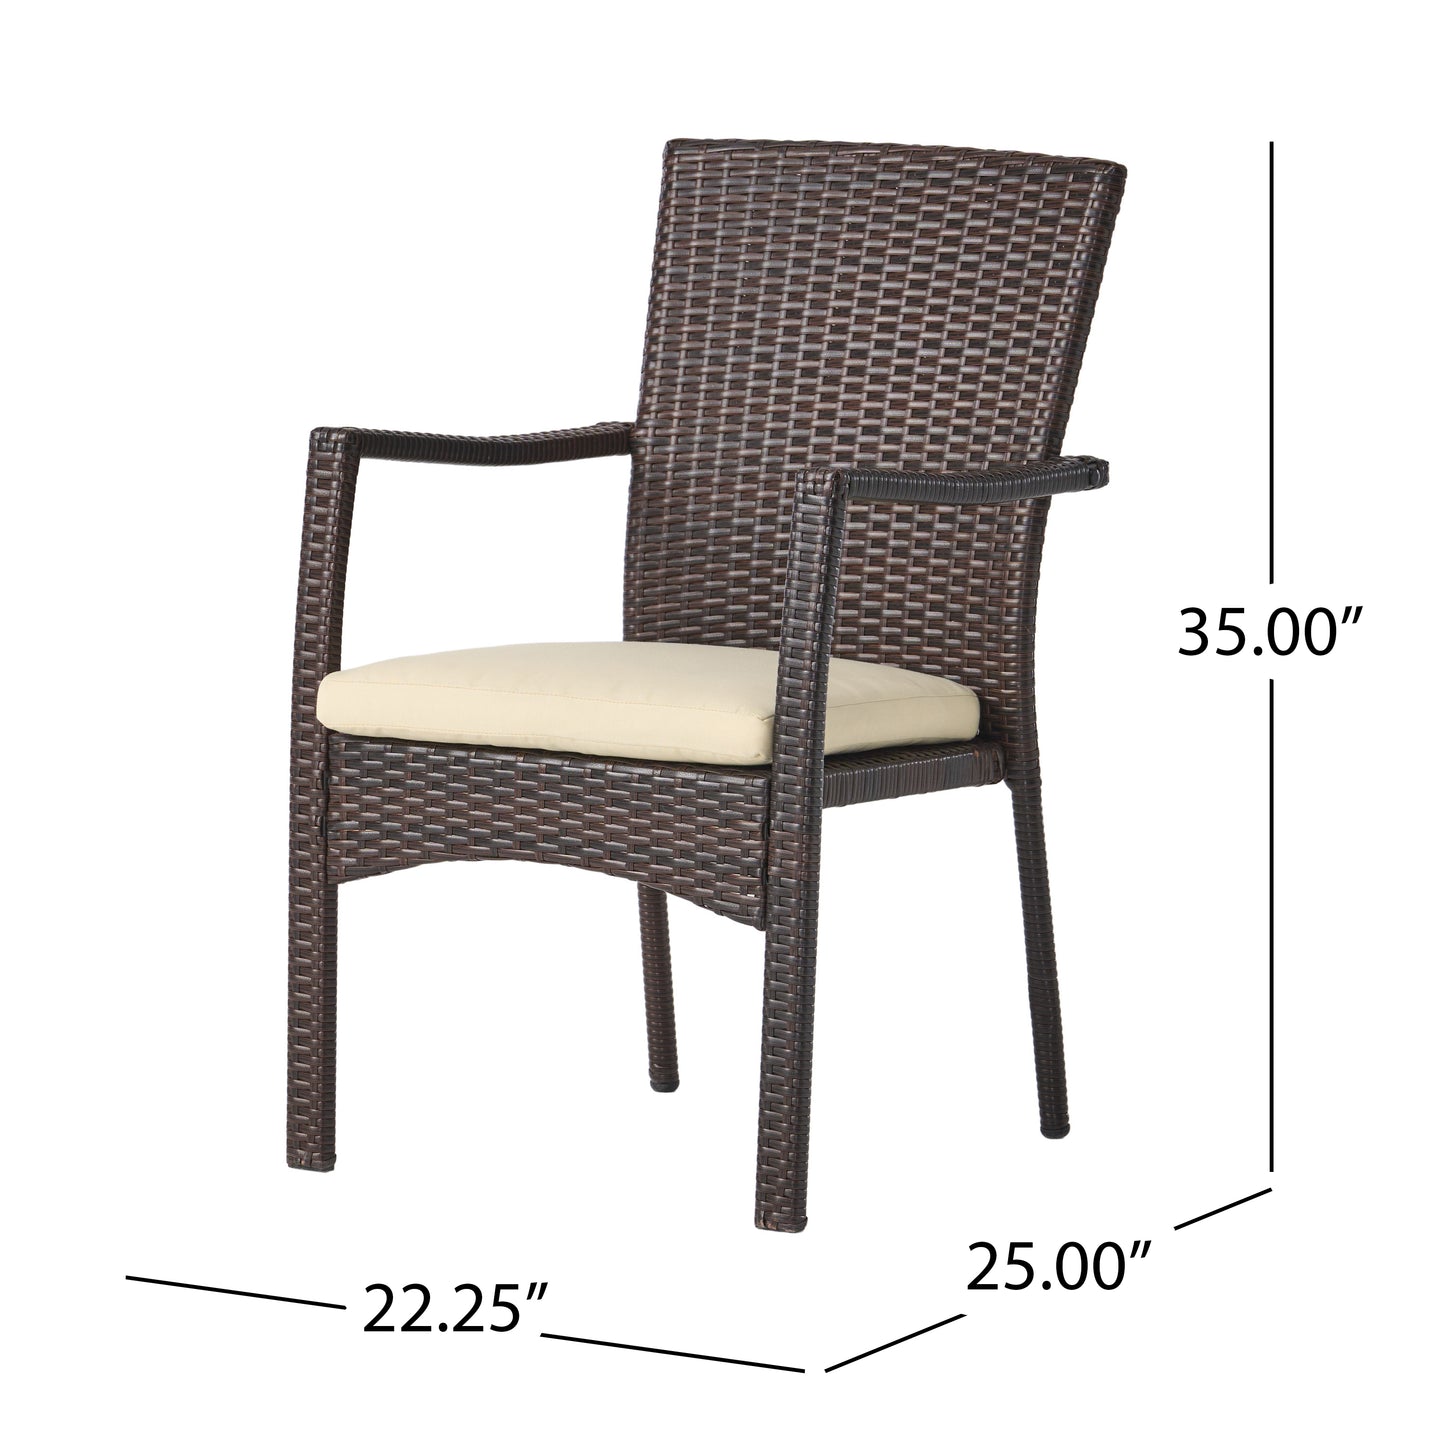 Humphrey Outdoor 6-Seater Acacia Wood Dining Set with Wicker Chairs, Sandblast Natural Finish and Multi Brown and Beige